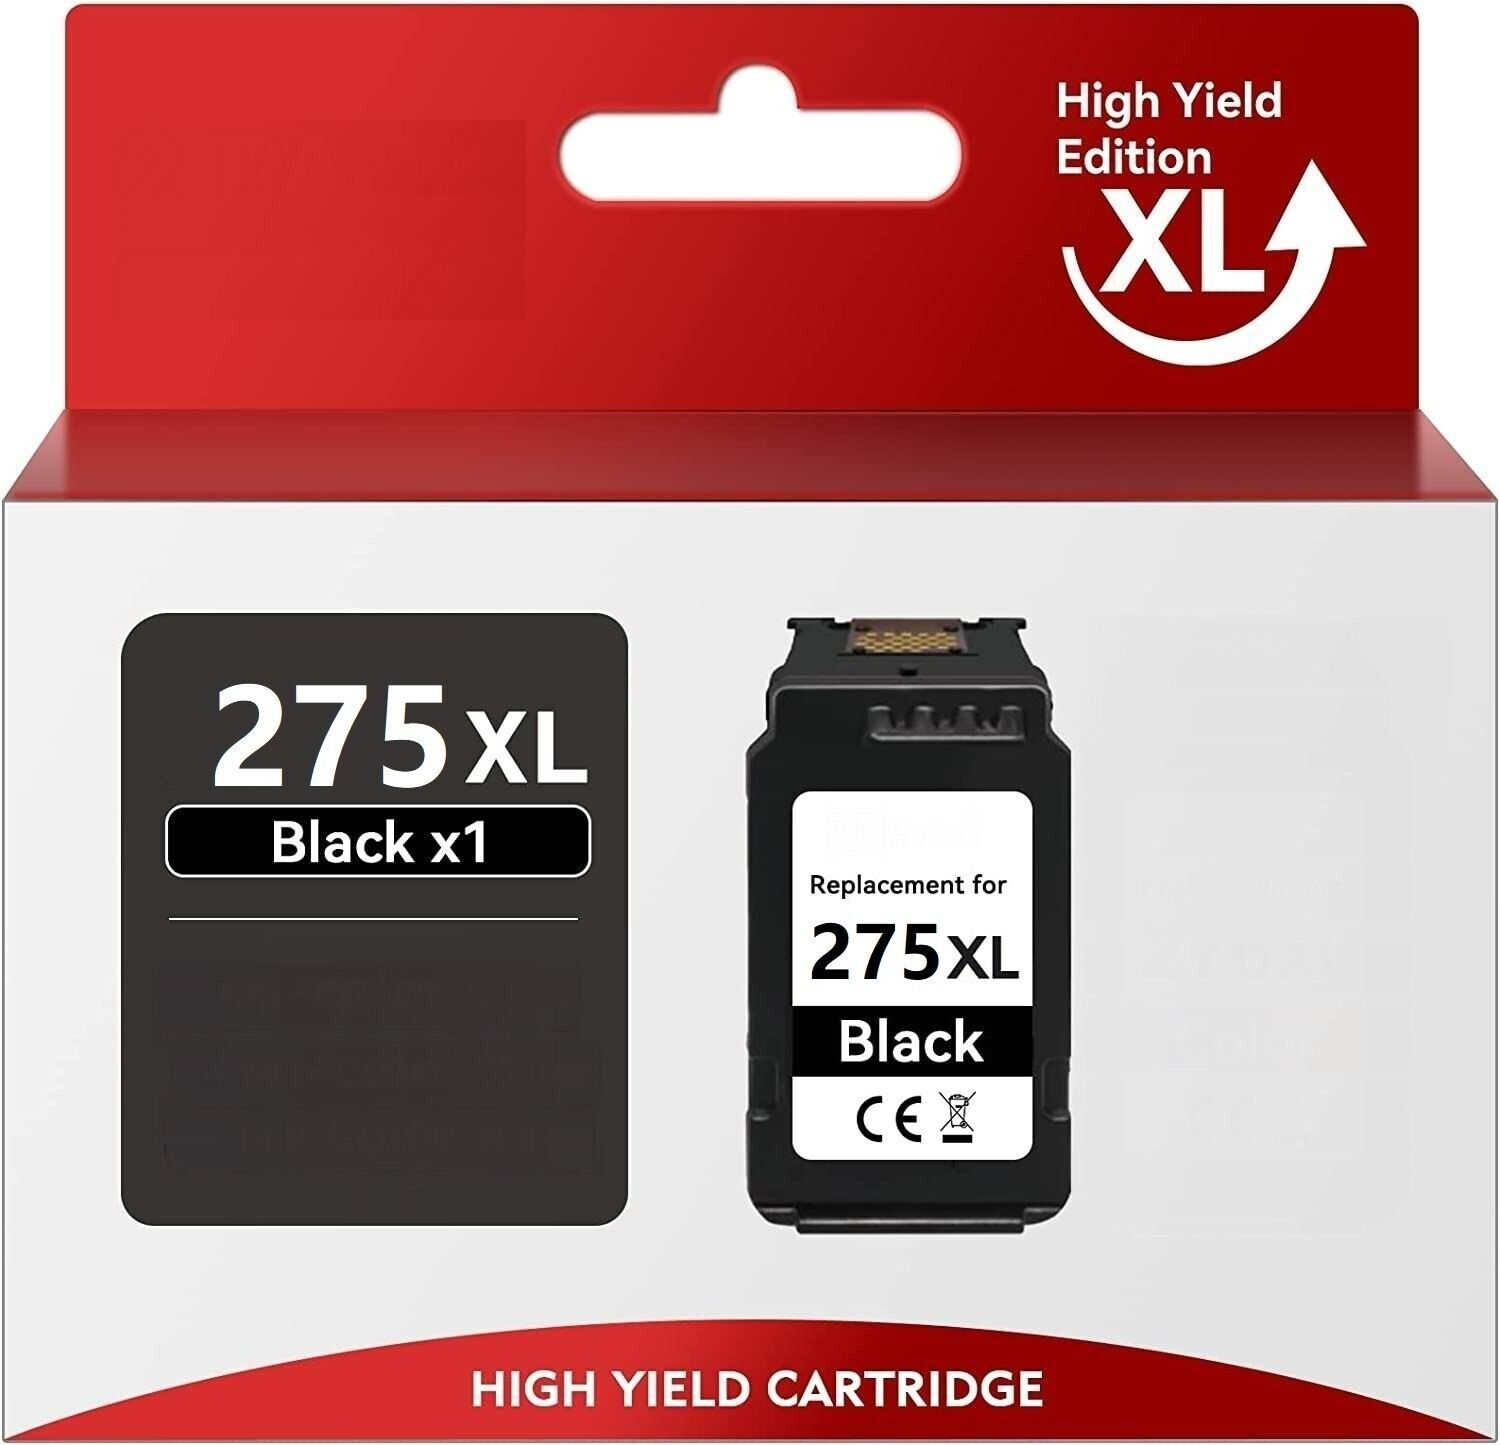 PG275 XL Black Ink compatible with Canon PIXMA TS3500 TS3522 TS3520 TR4700